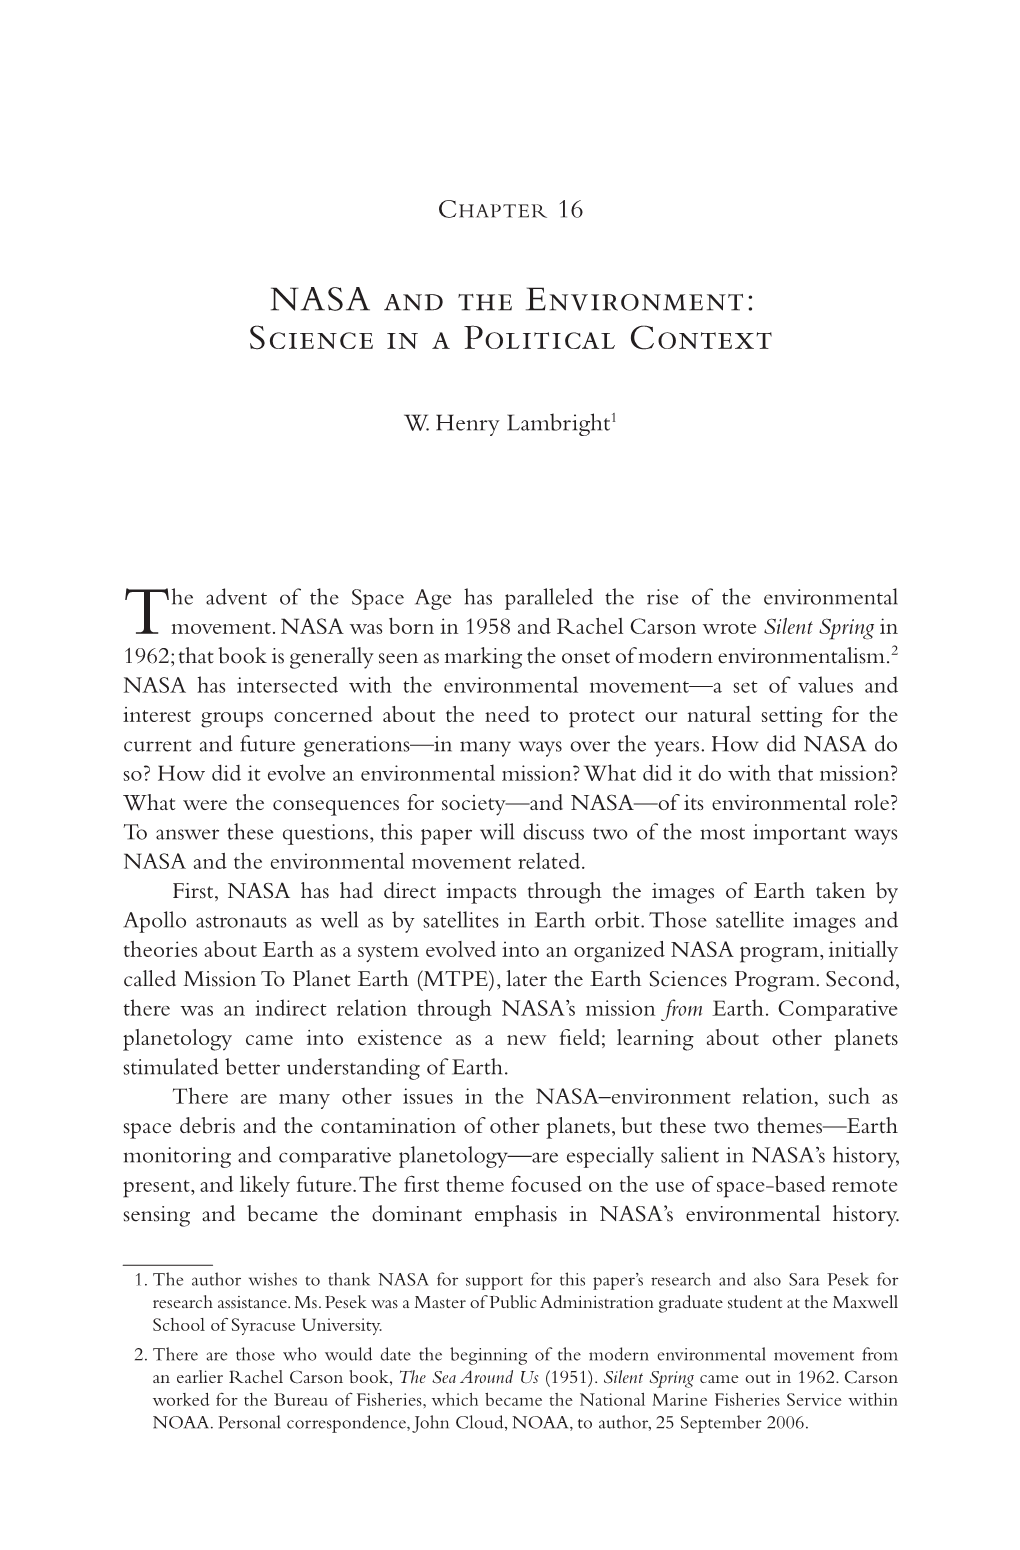 NASA and the Environment: Science in a Political Context 313